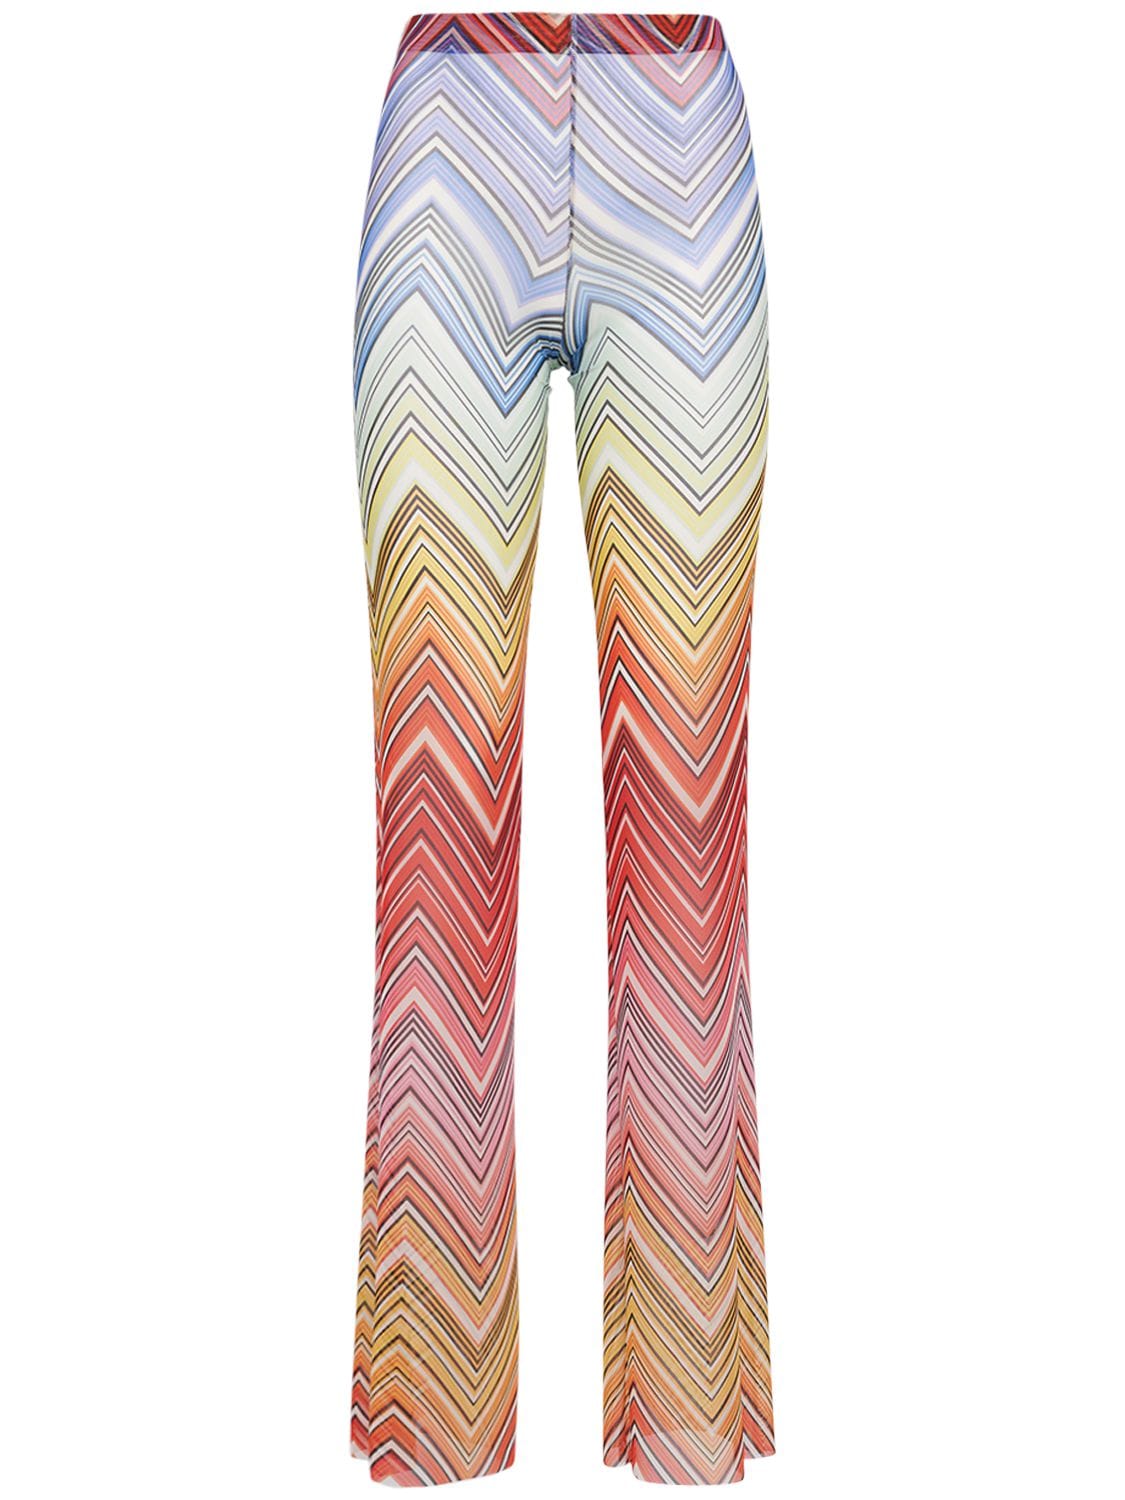 Image of Chevron Print Tulle Flared Pants